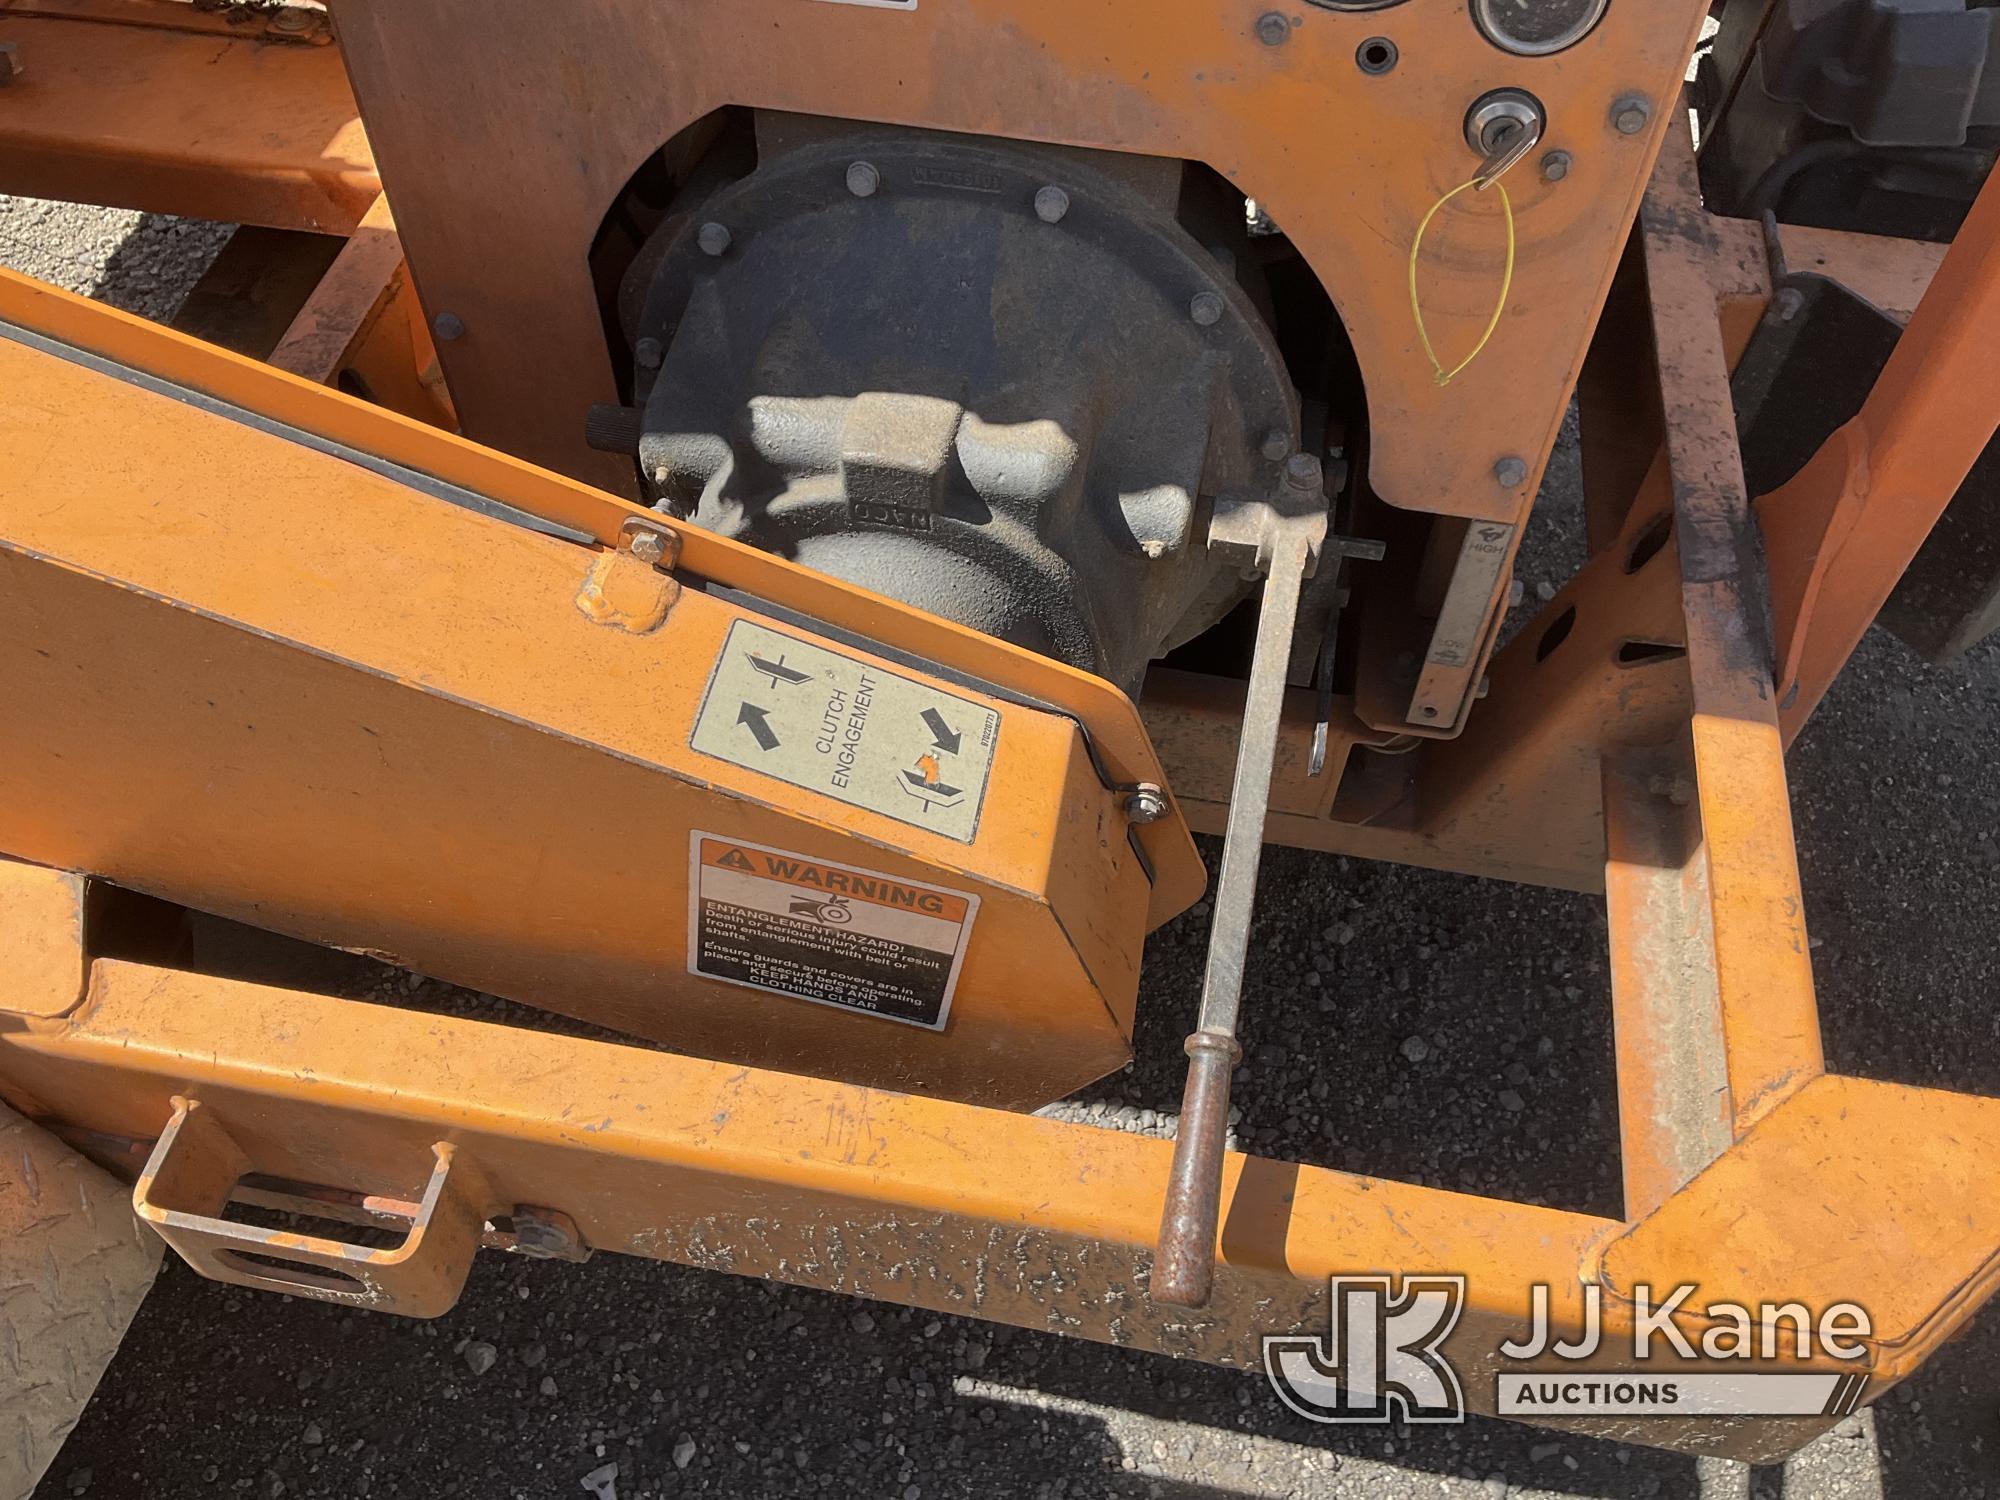 (Jurupa Valley, CA) 2009 Altec WC126A Chipper (12in Drum) Not Running, Engine Blown.  Coolant In Oil